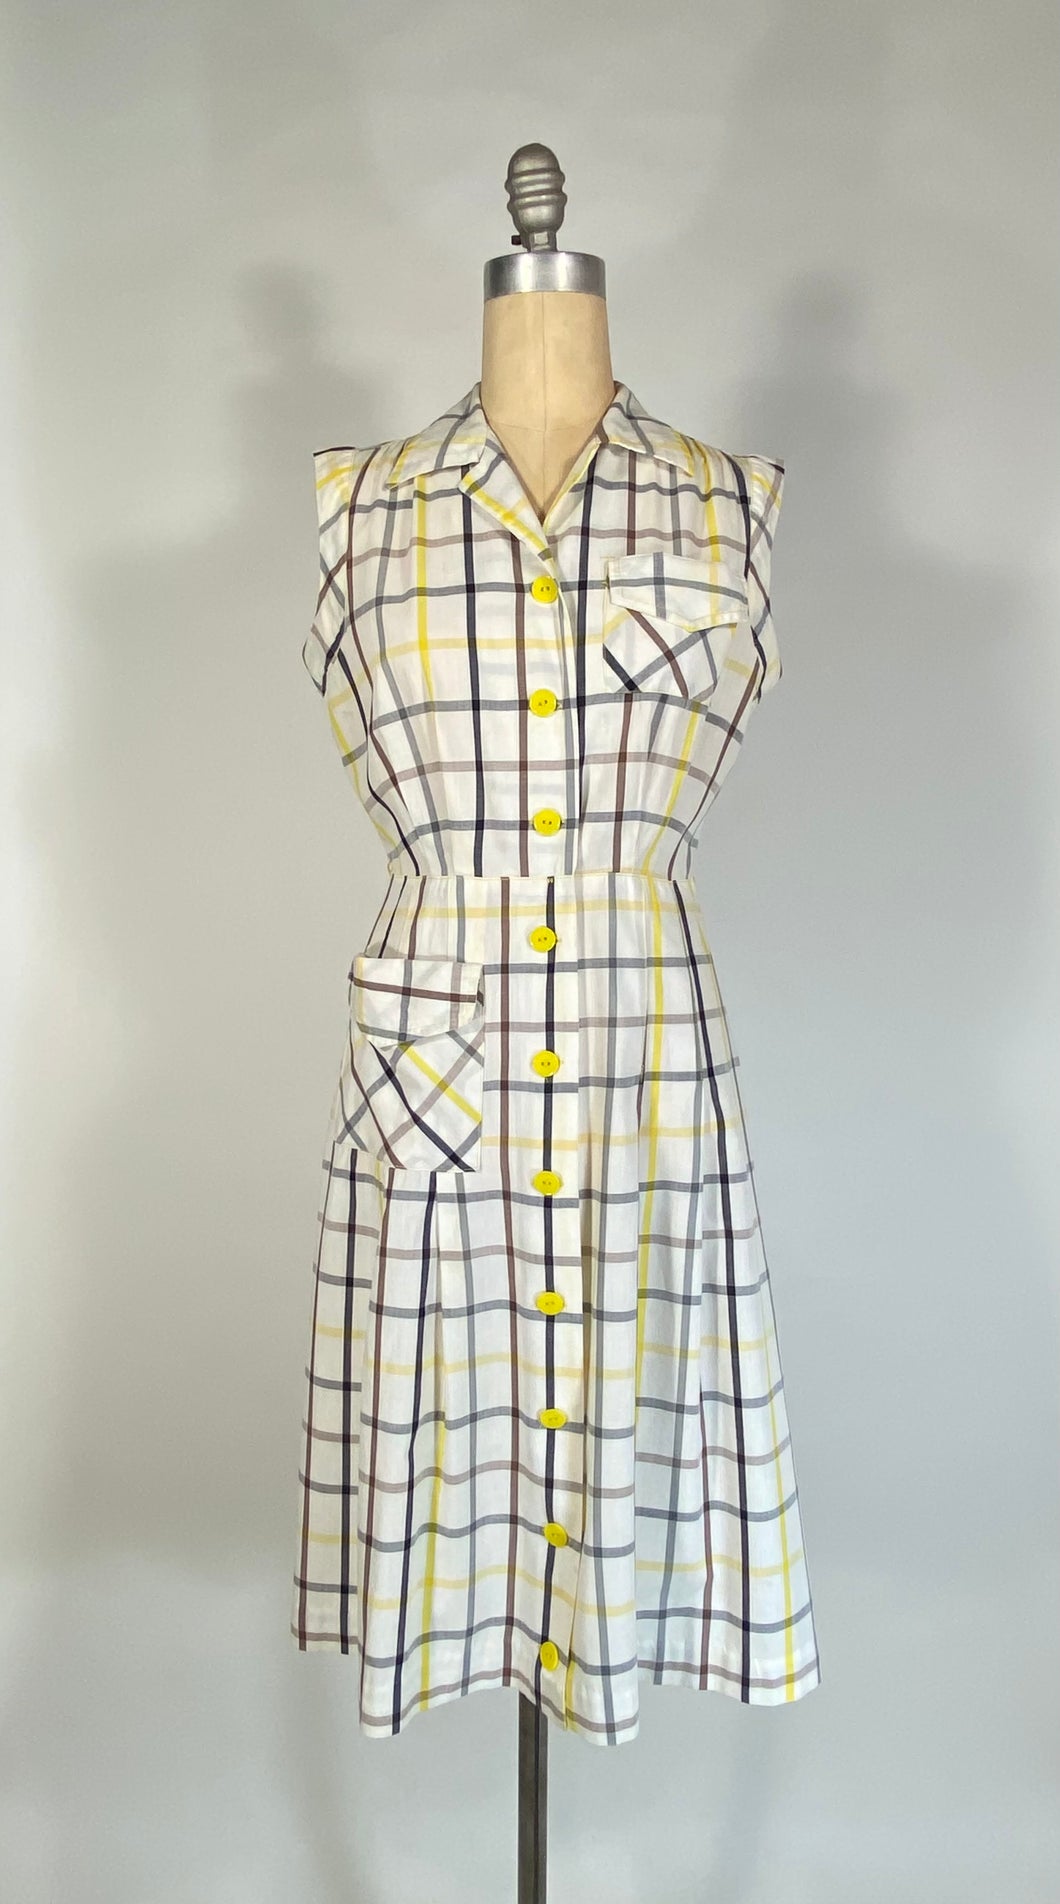 Vintage 1940’s-50’s plaid check summery cotton sport dress by Activi-Tee